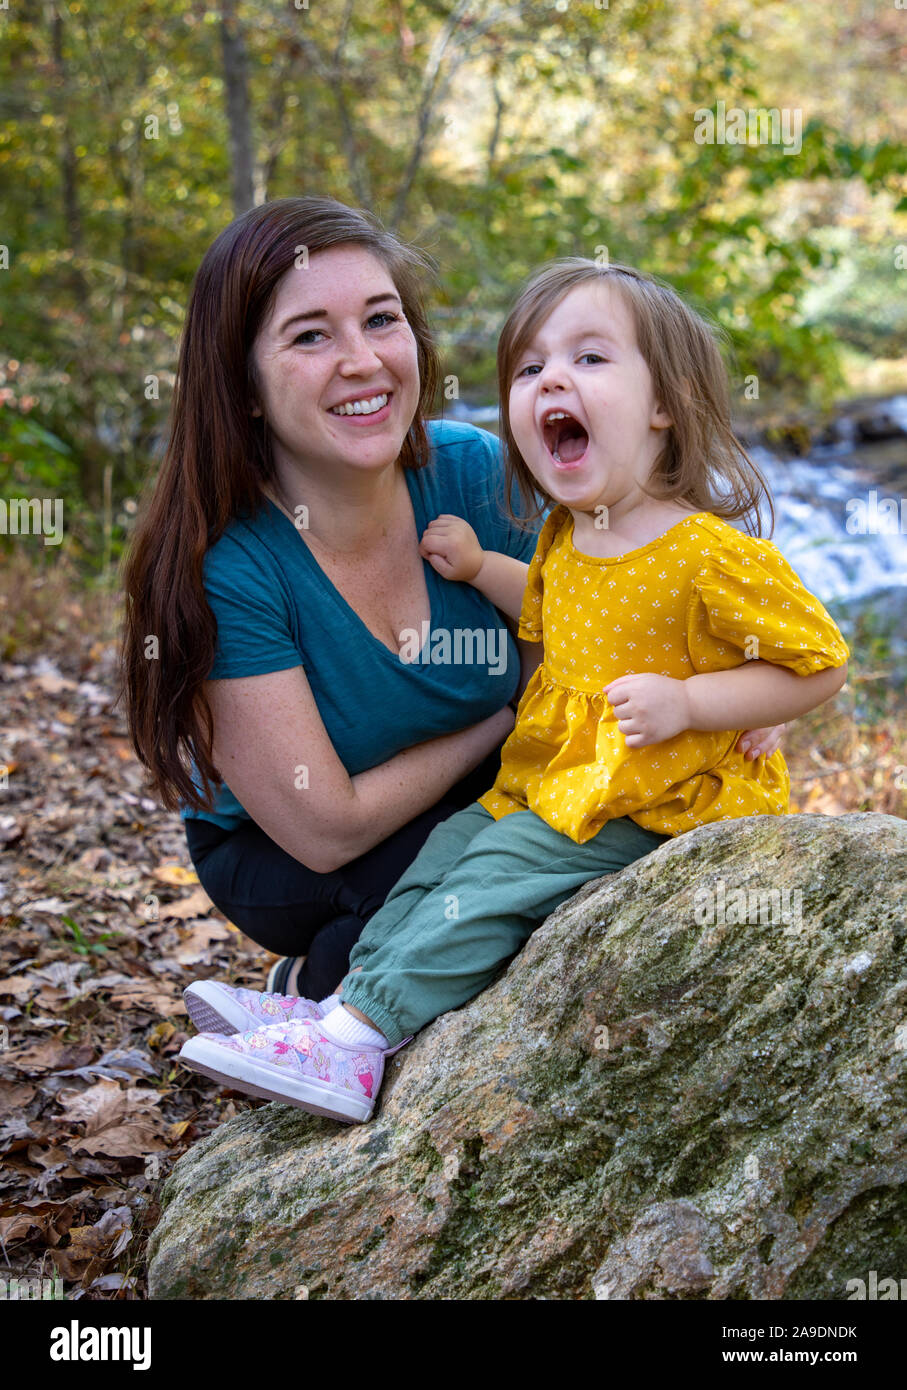 Daughter being silly yelling in woods Stock Photo